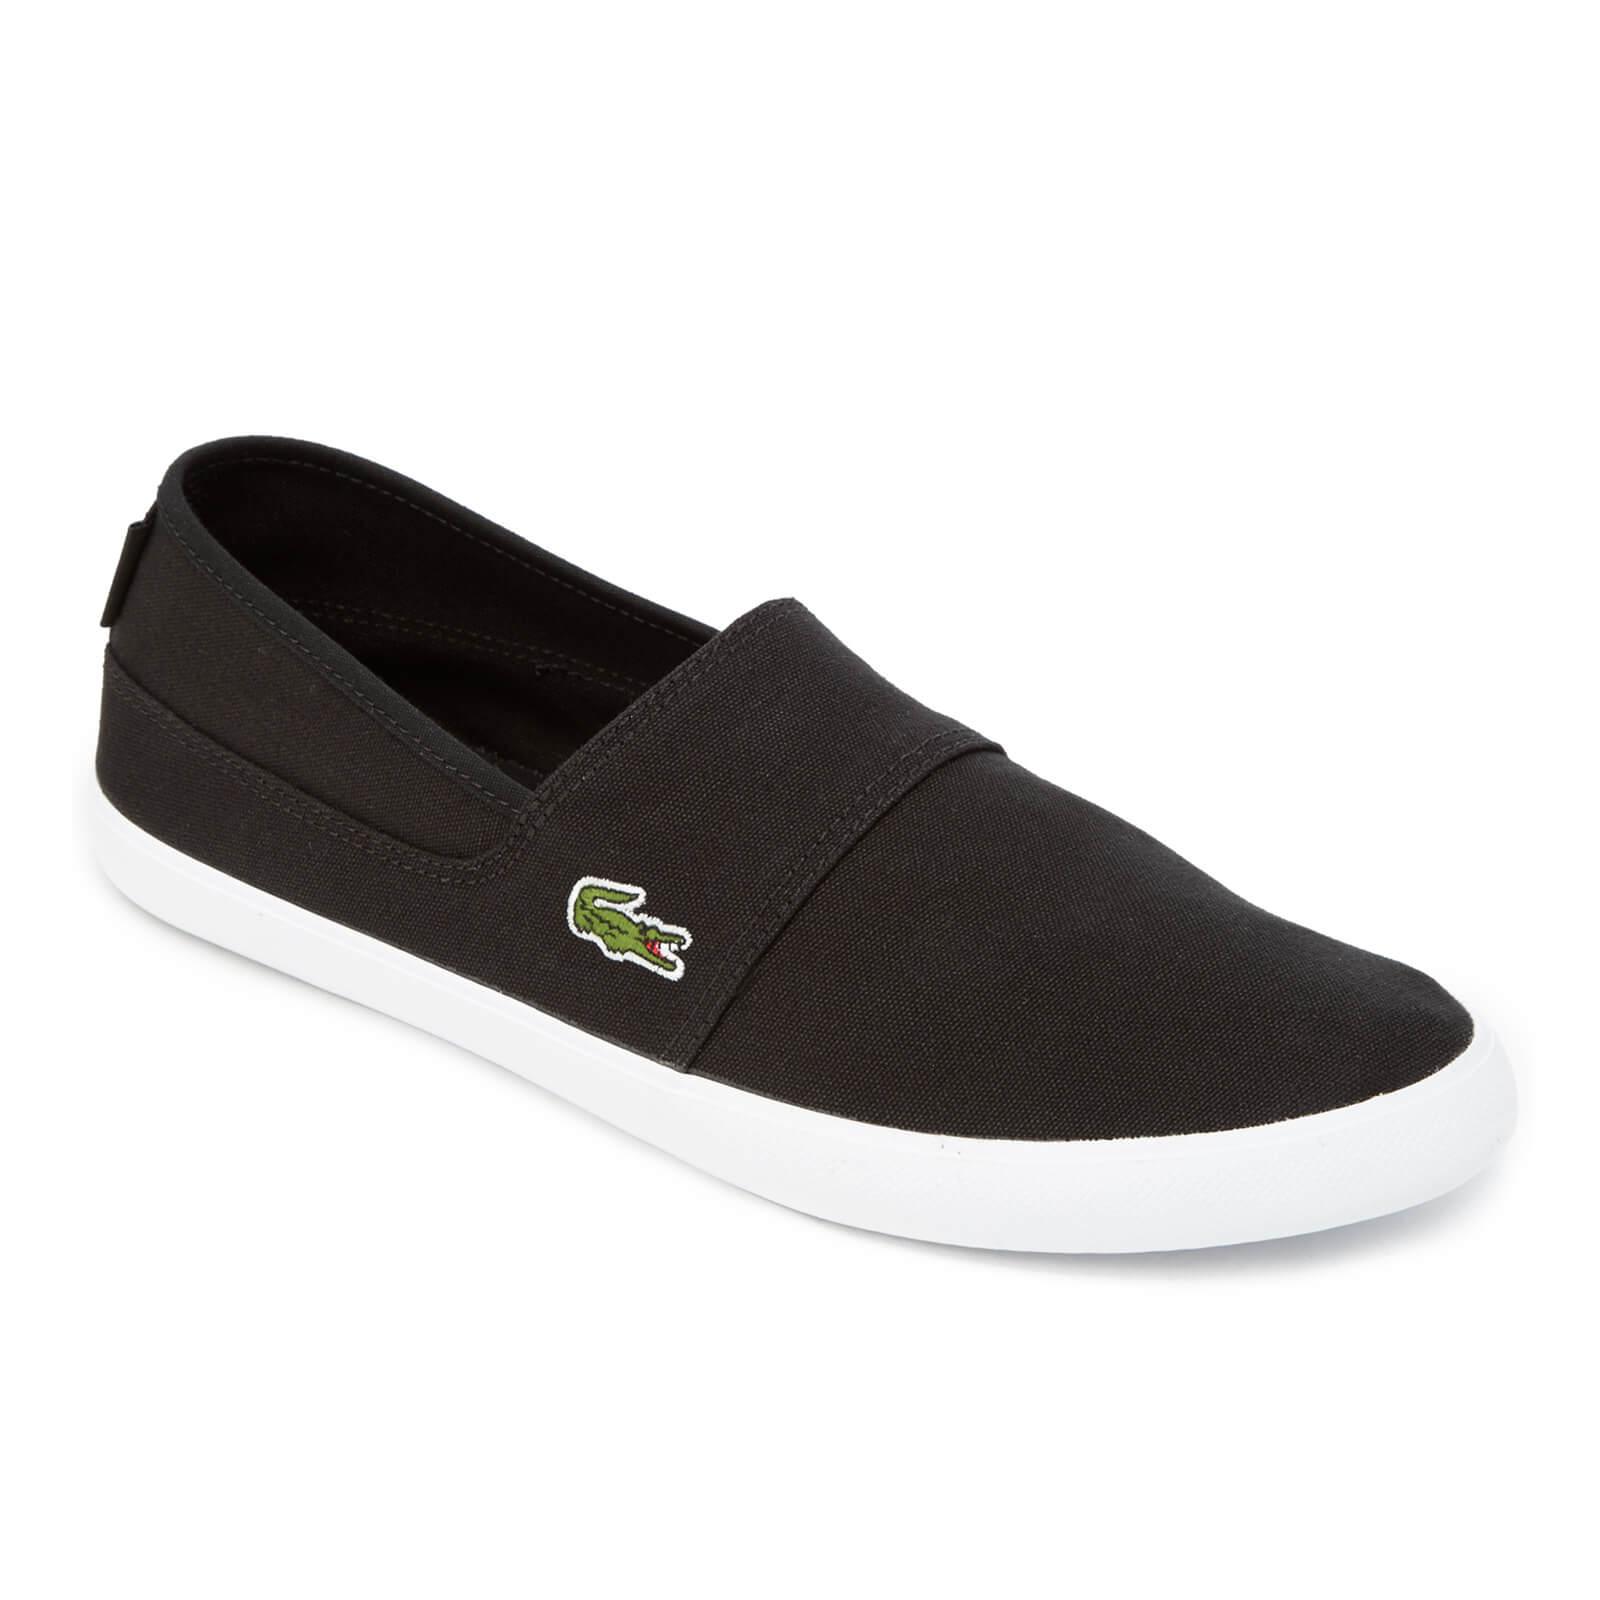 Lacoste Marice Canvas Slip-on Pumps in Black for Men - Lyst